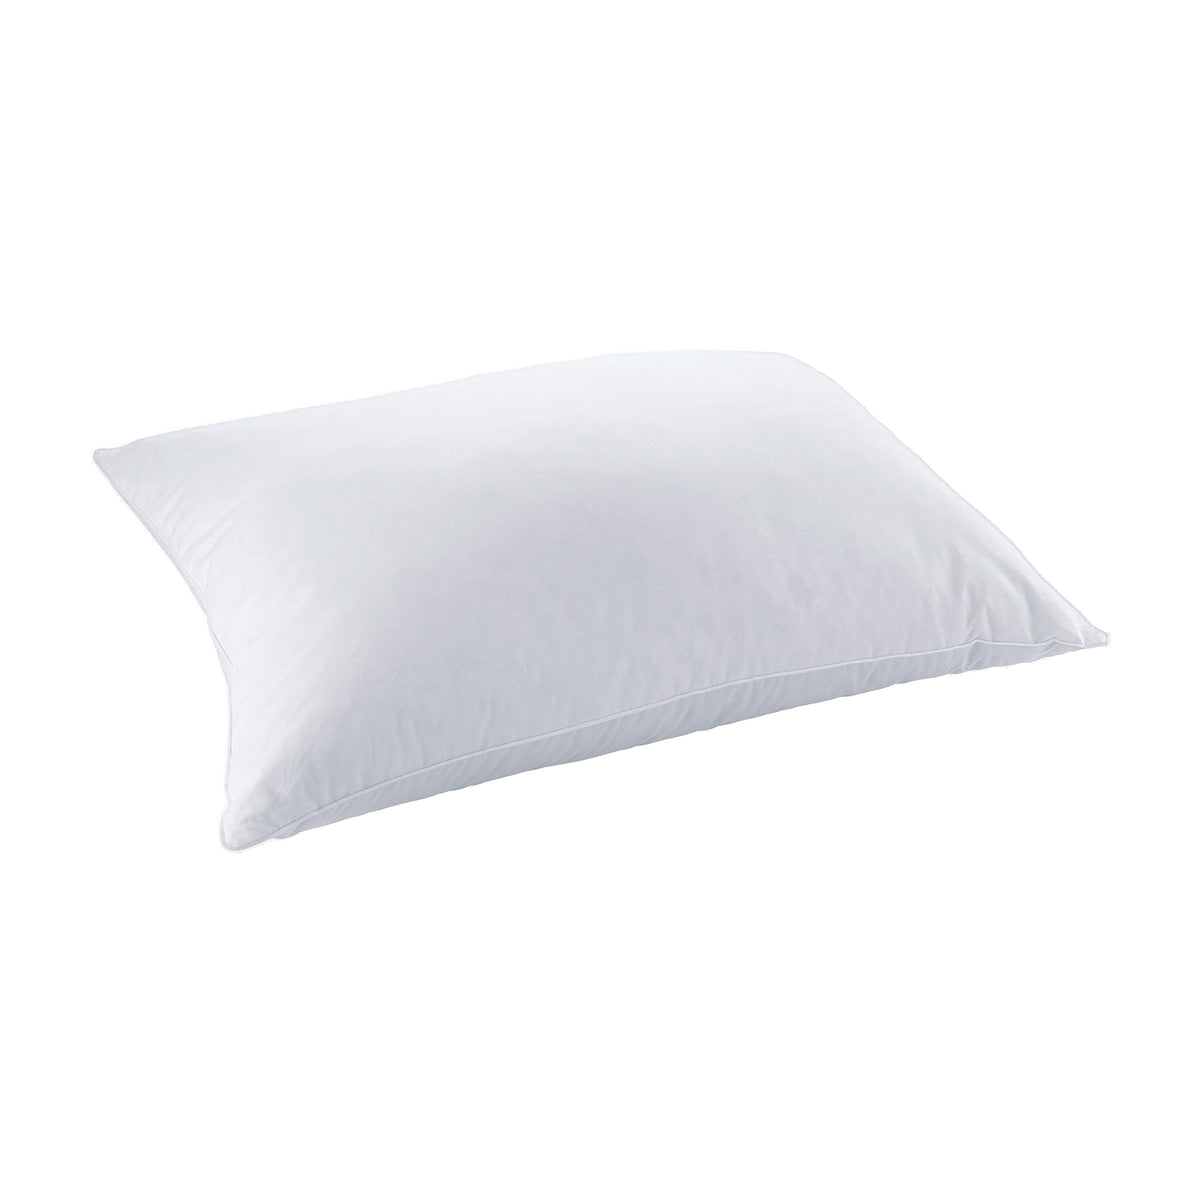 Yves Delorme Down &amp; Feather 3 Chamber Pillows Firm Weight floating against white background